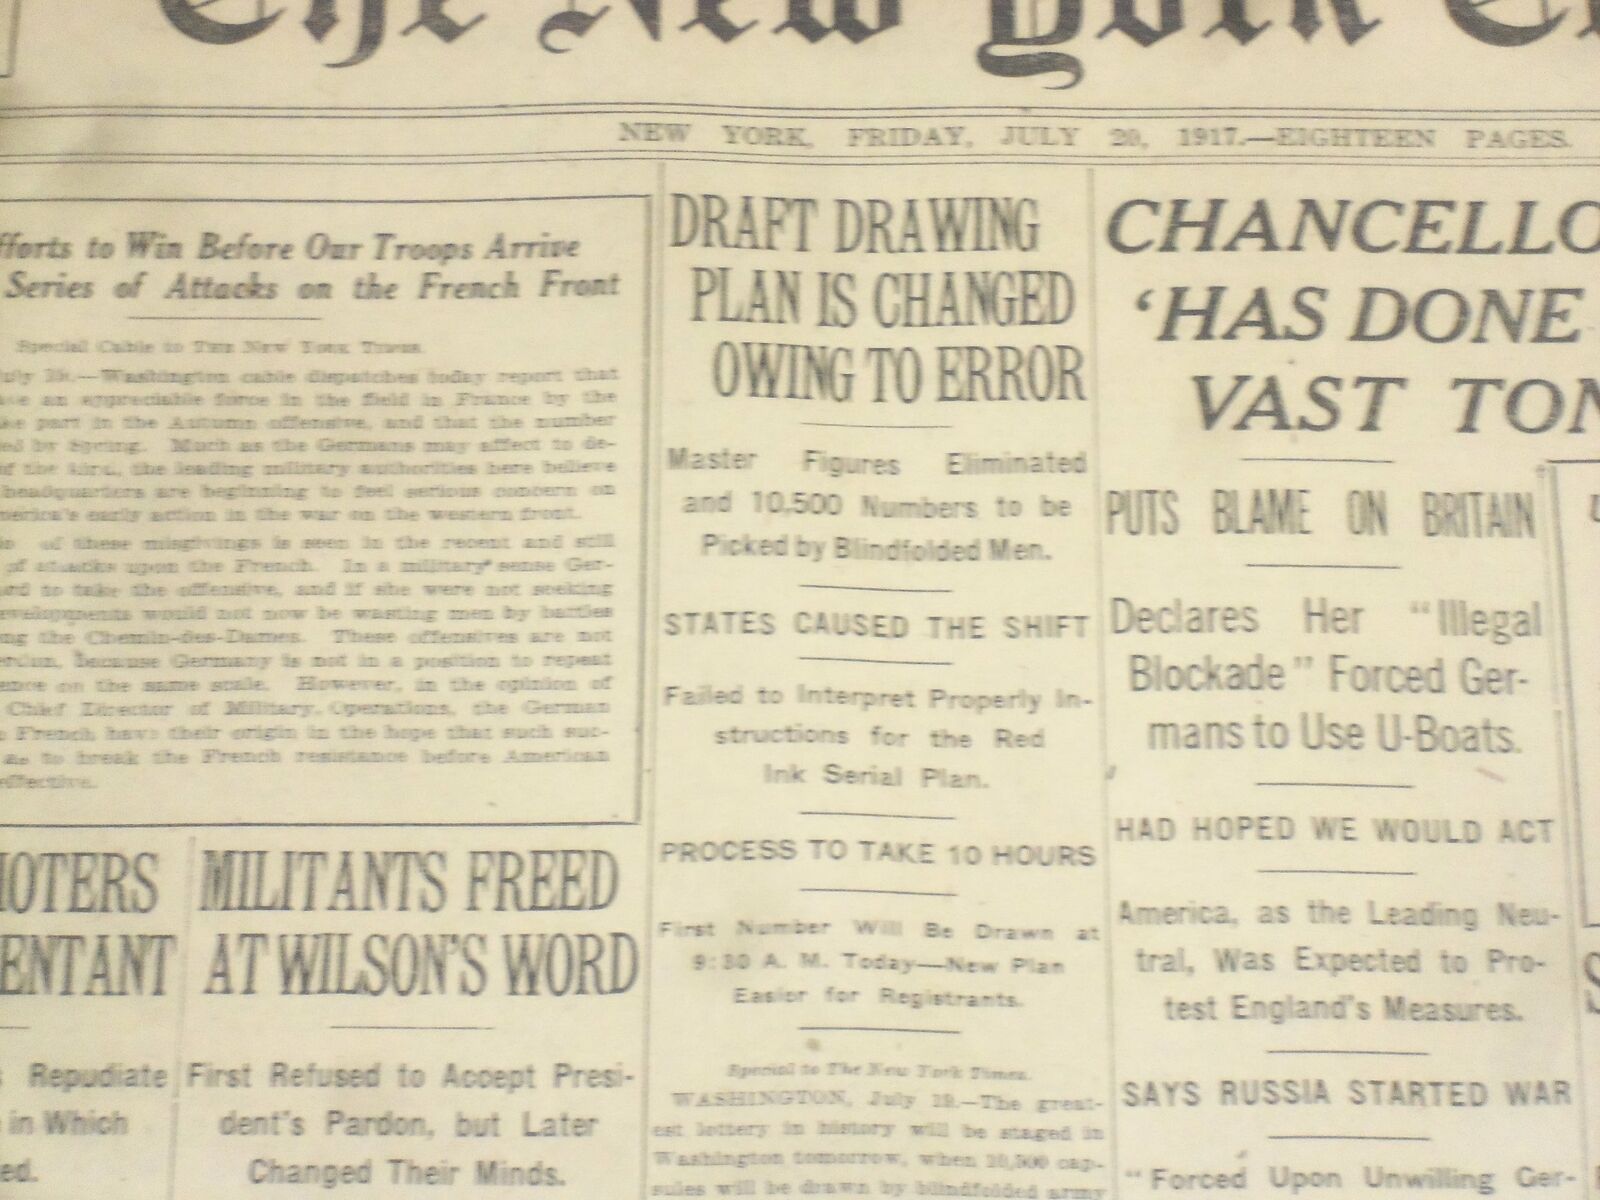 1917 JULY 20 NEW YORK TIMES - DRAFT DRAWING PLAN IS CHANGED - NT 9318